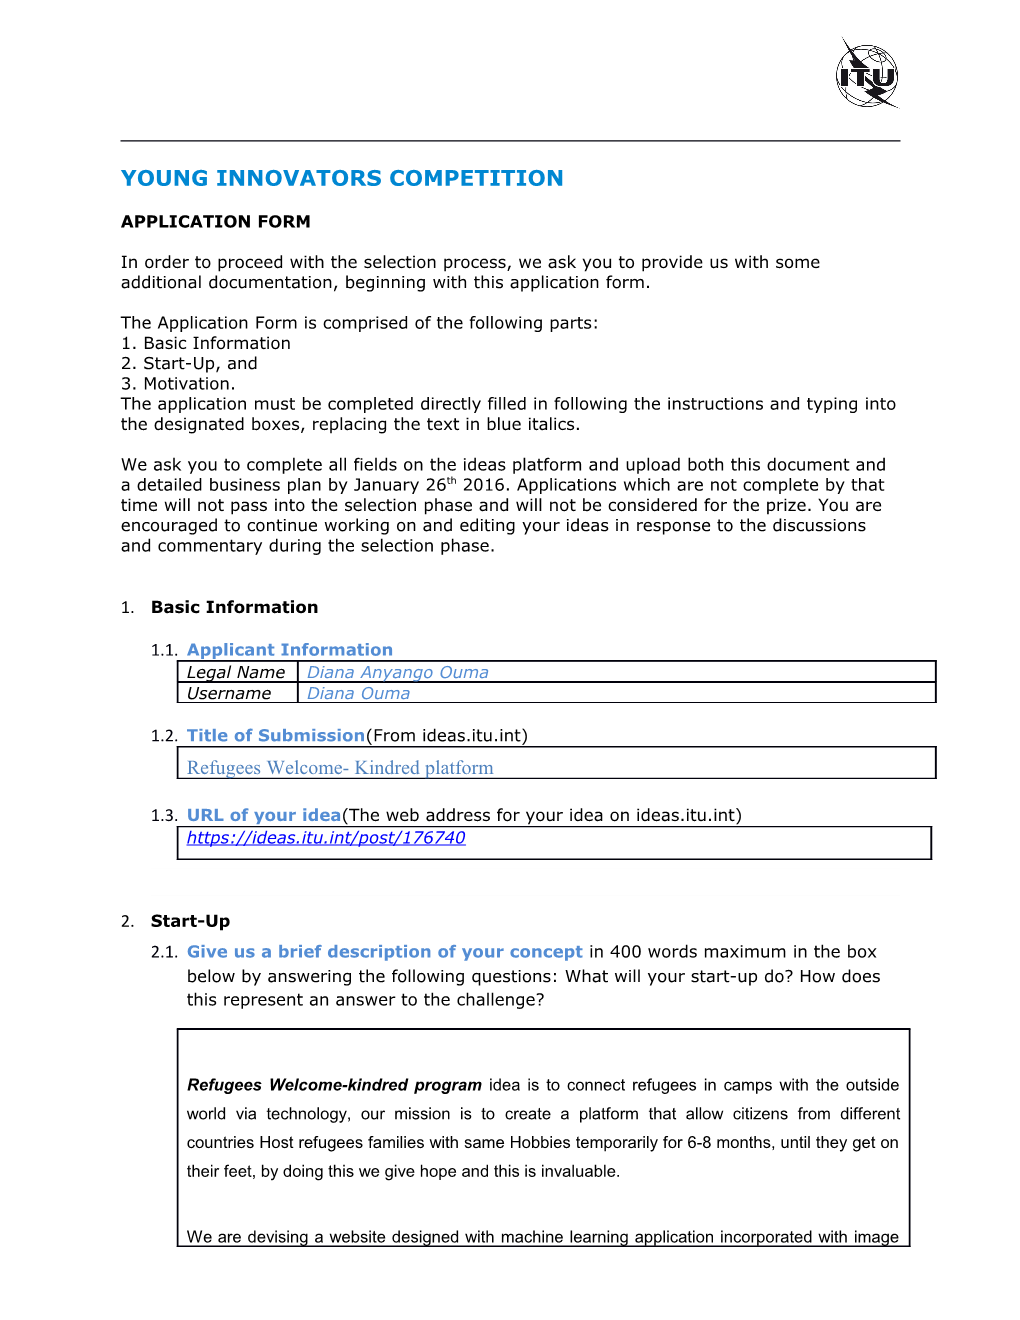 YOUNG INNOVATORS Competition